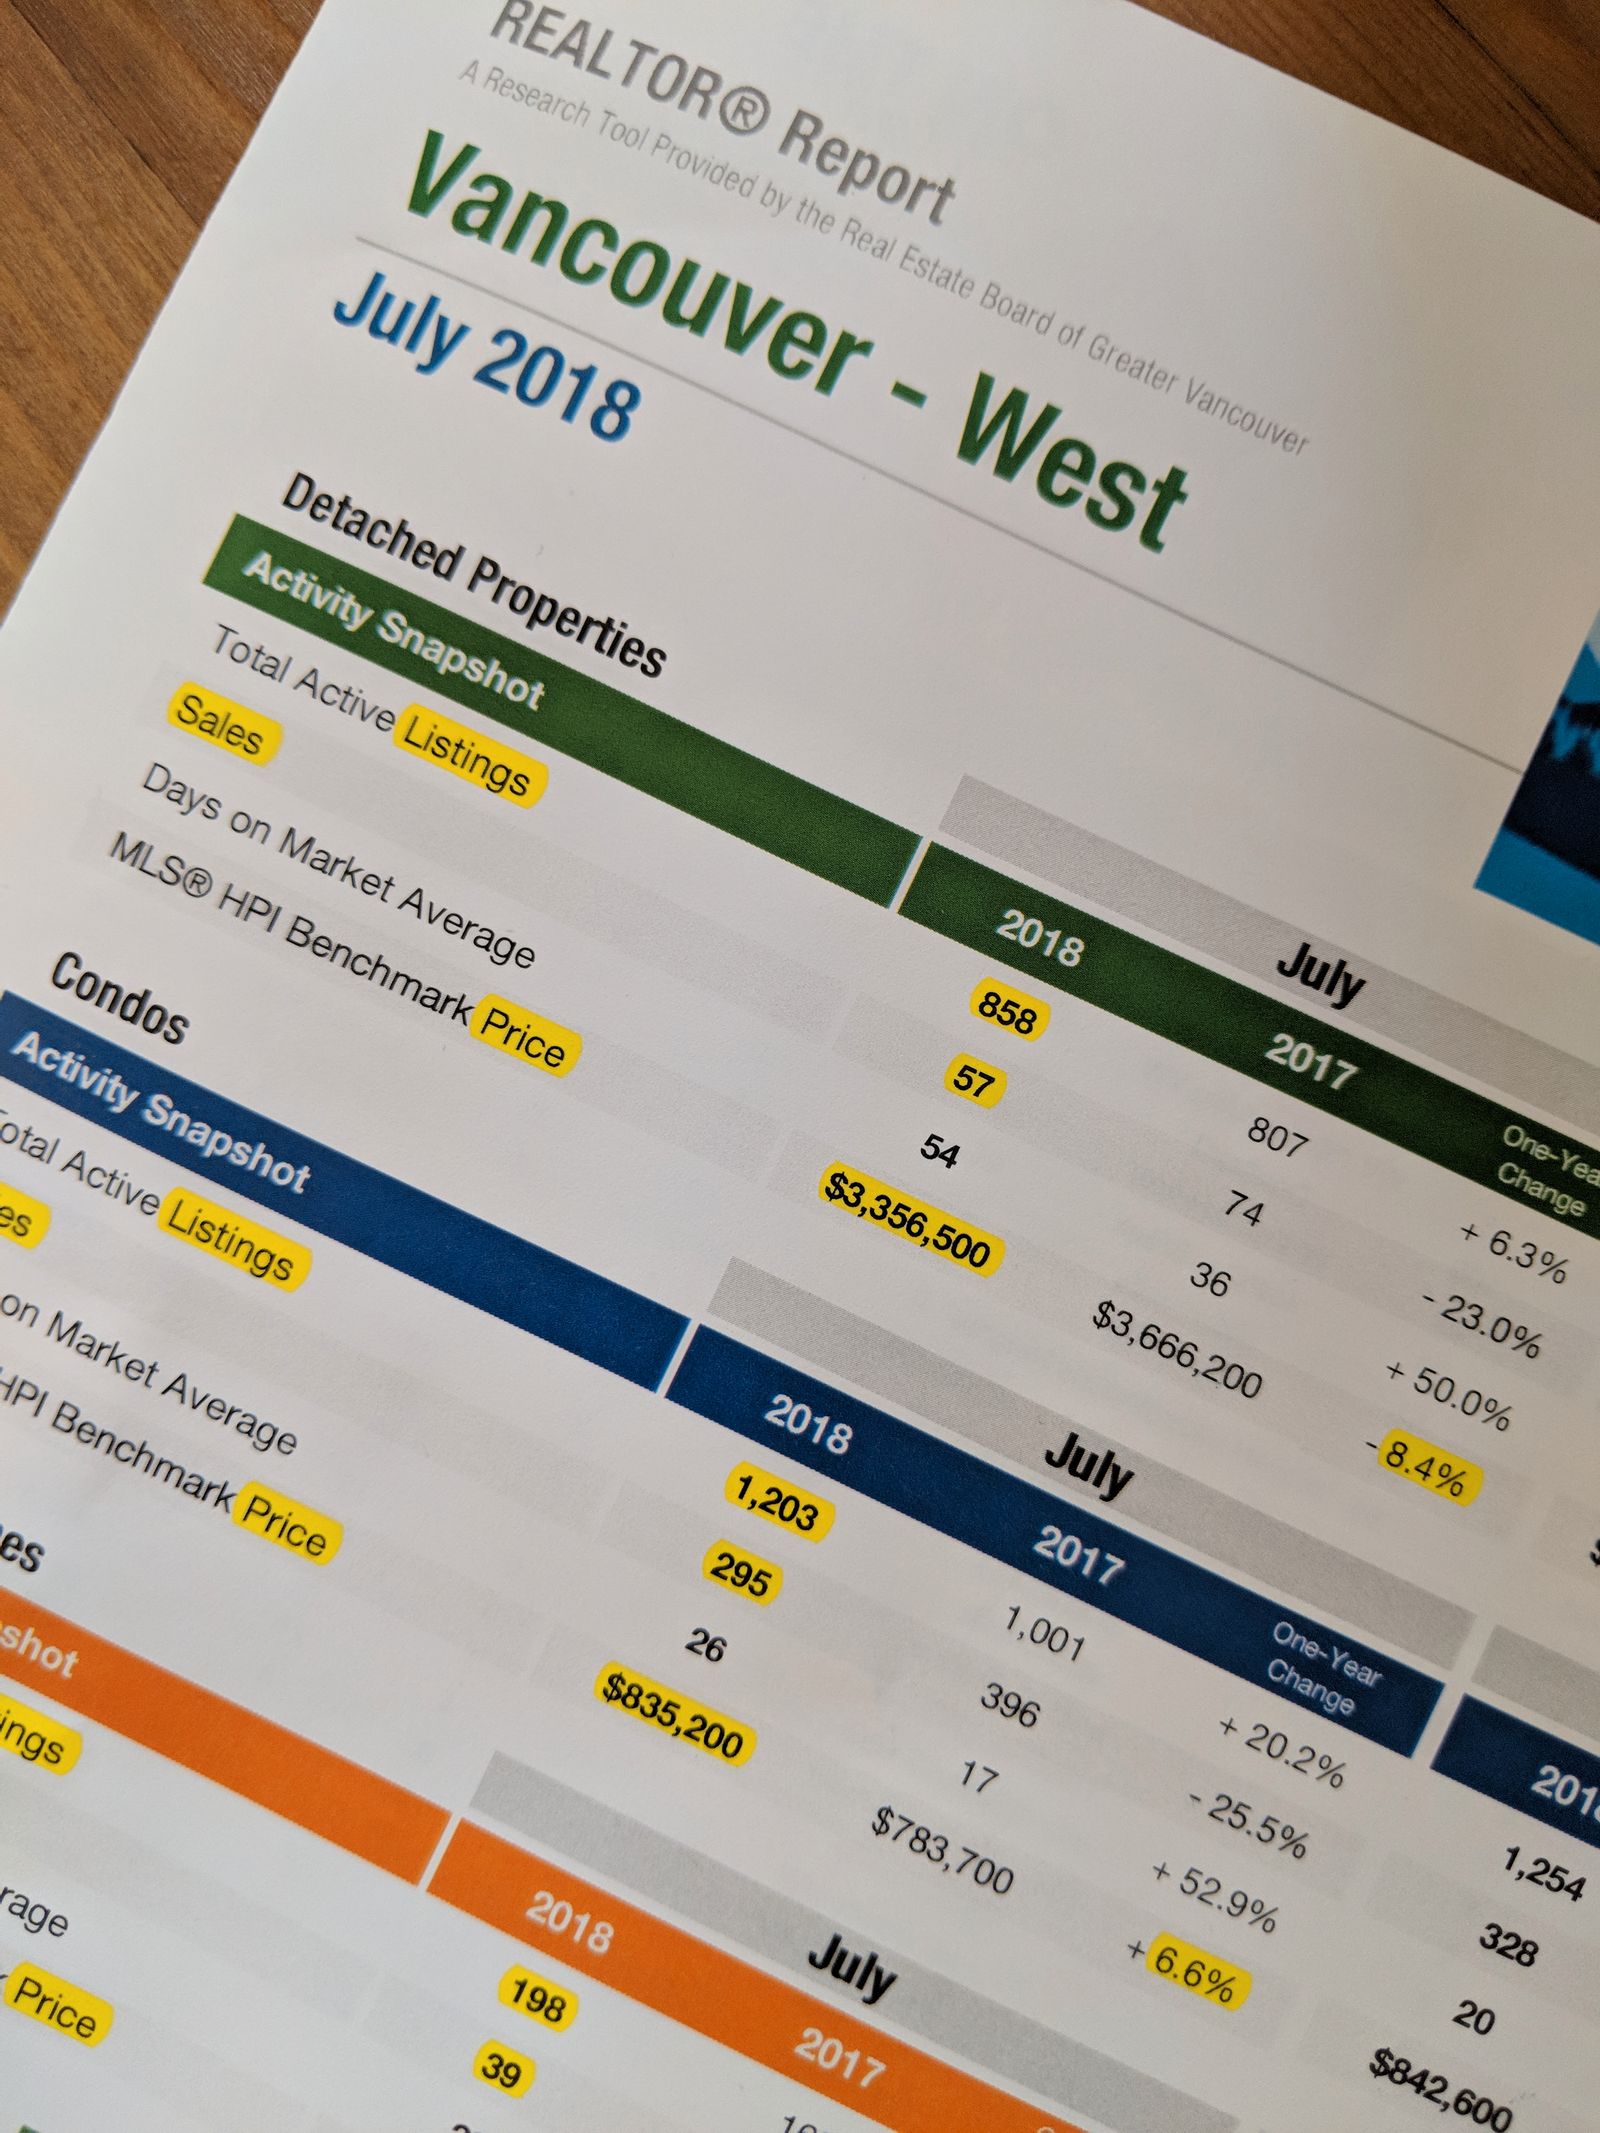 July 2018 Vancouver West Stats